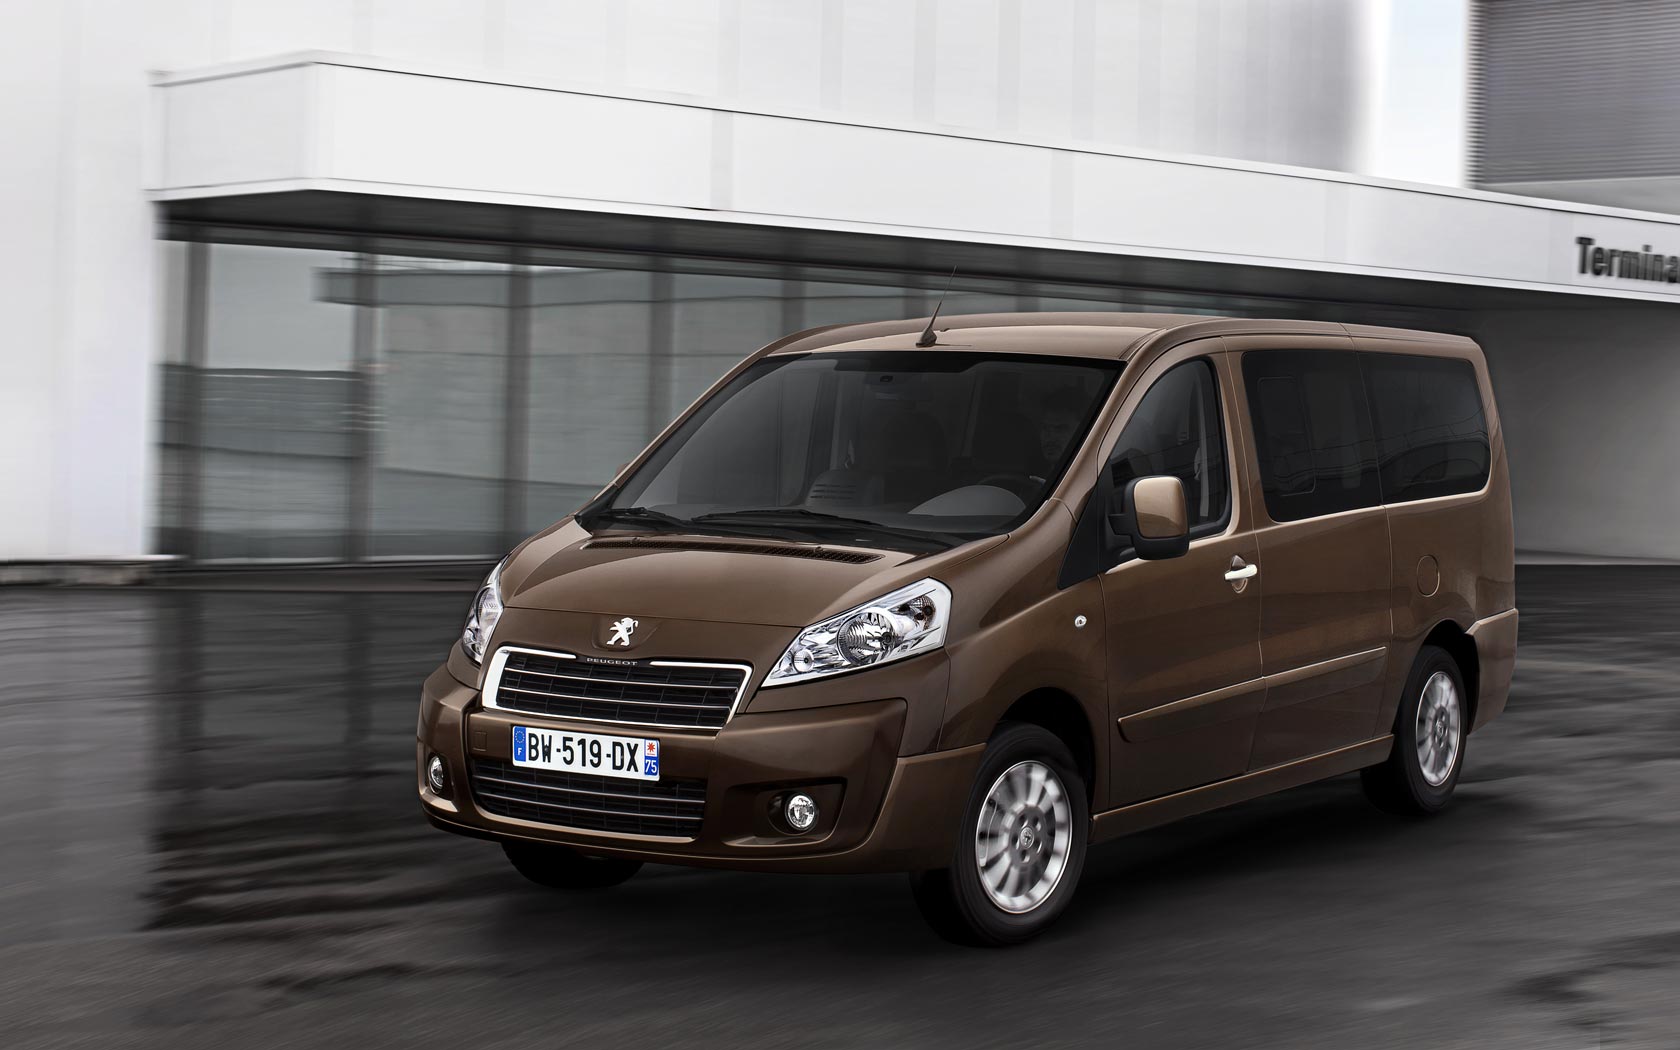 Peugeot Expert: The solution for a compact van